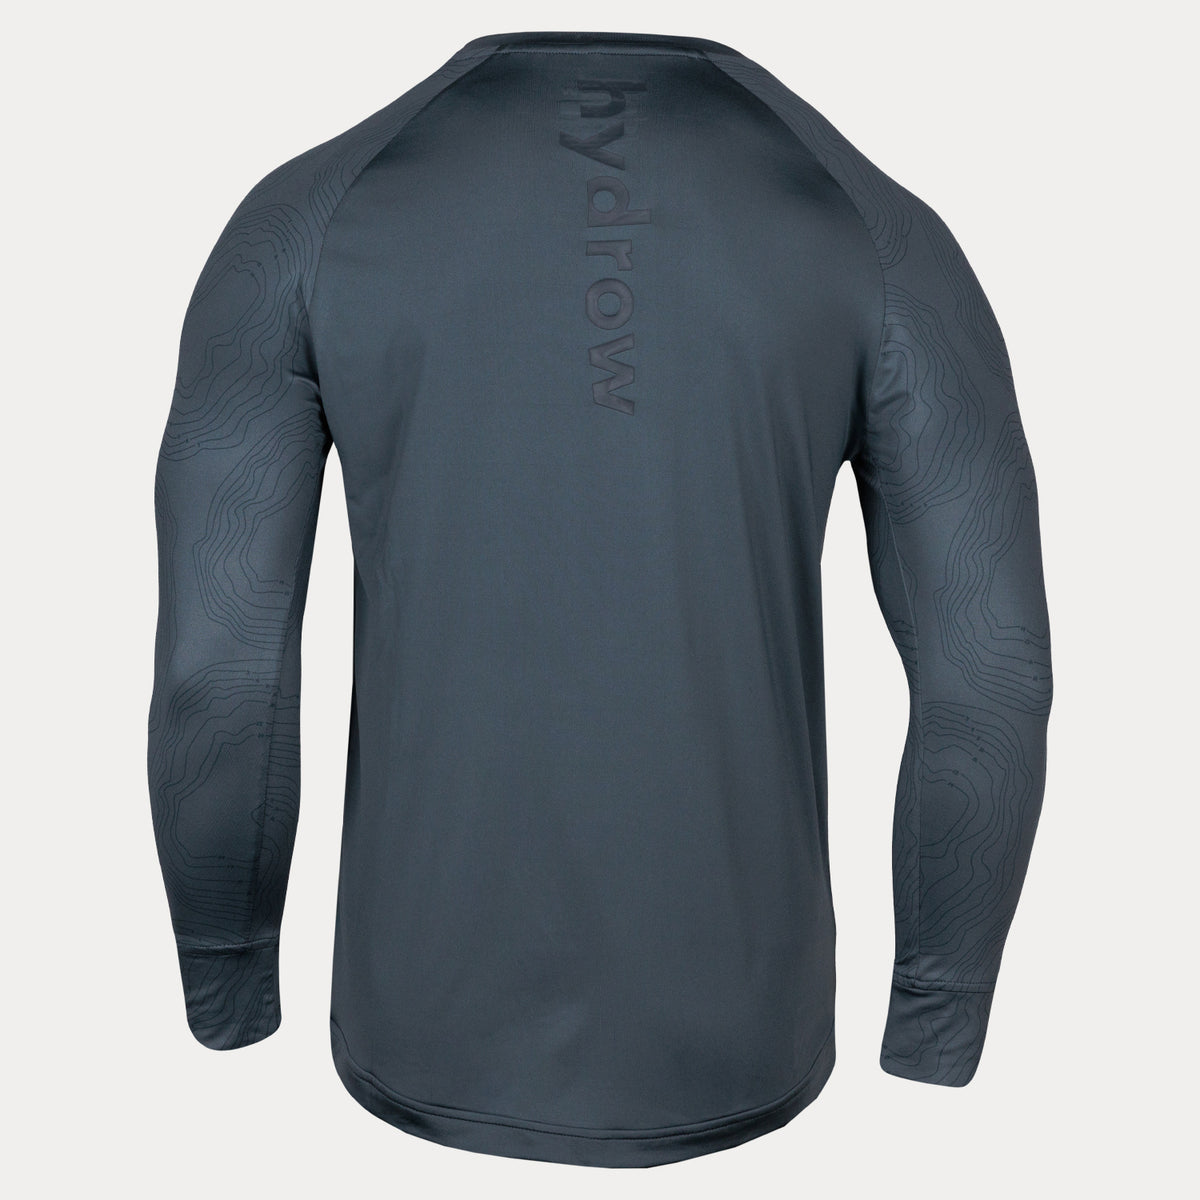 back view of long sleeve compression shirt with vertical &quot;hydrow&quot; text